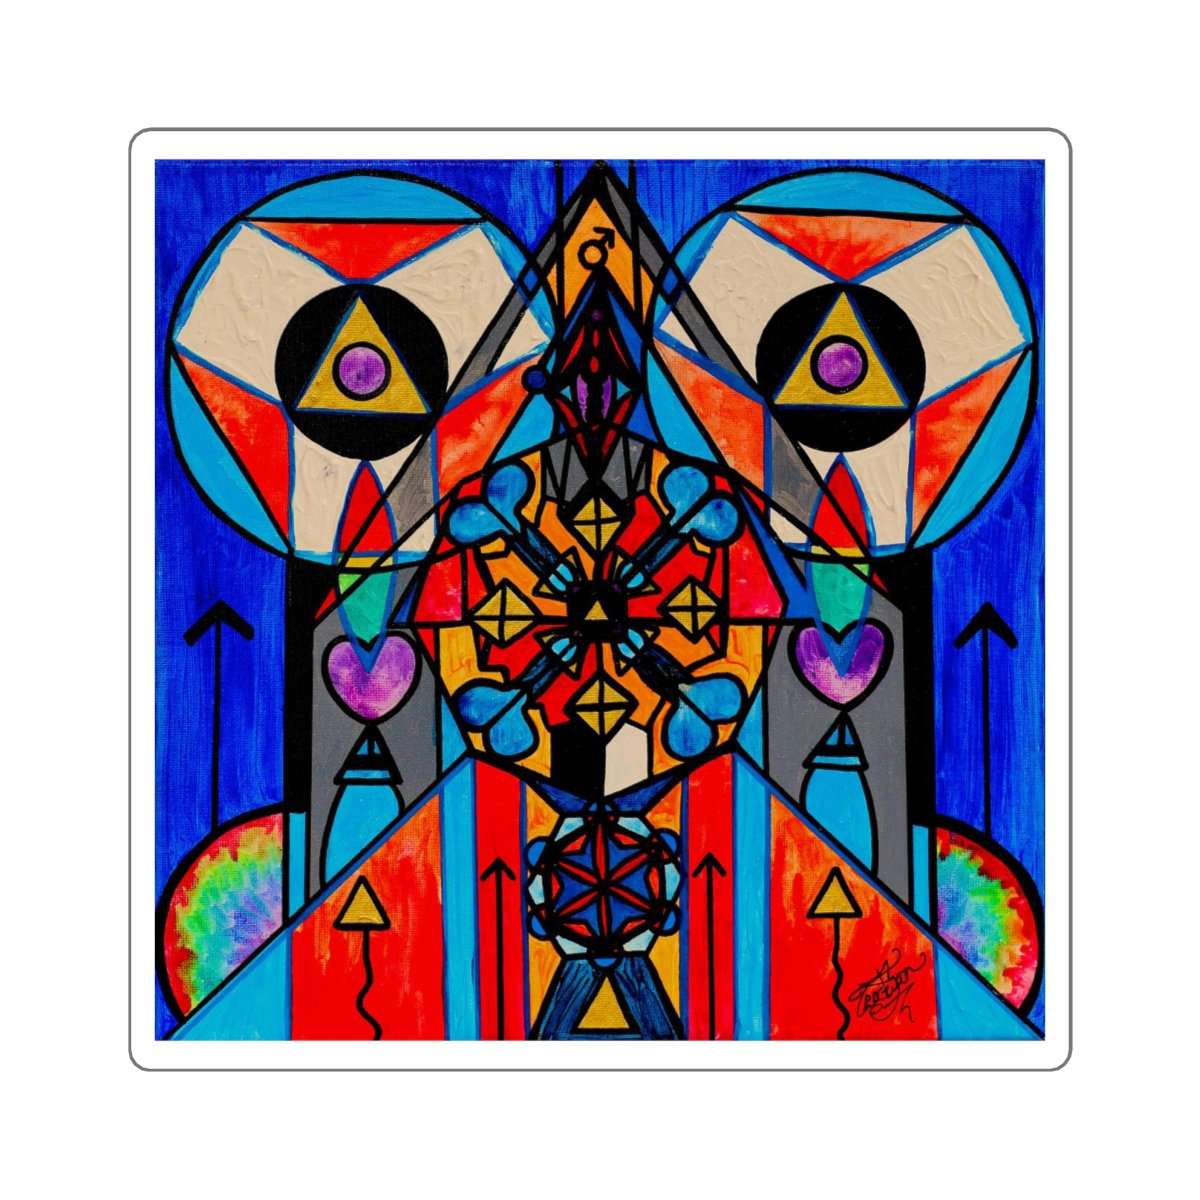 buy-cheap-wholesale-divine-masculine-activation-square-stickers-hot-on-sale_6.jpg